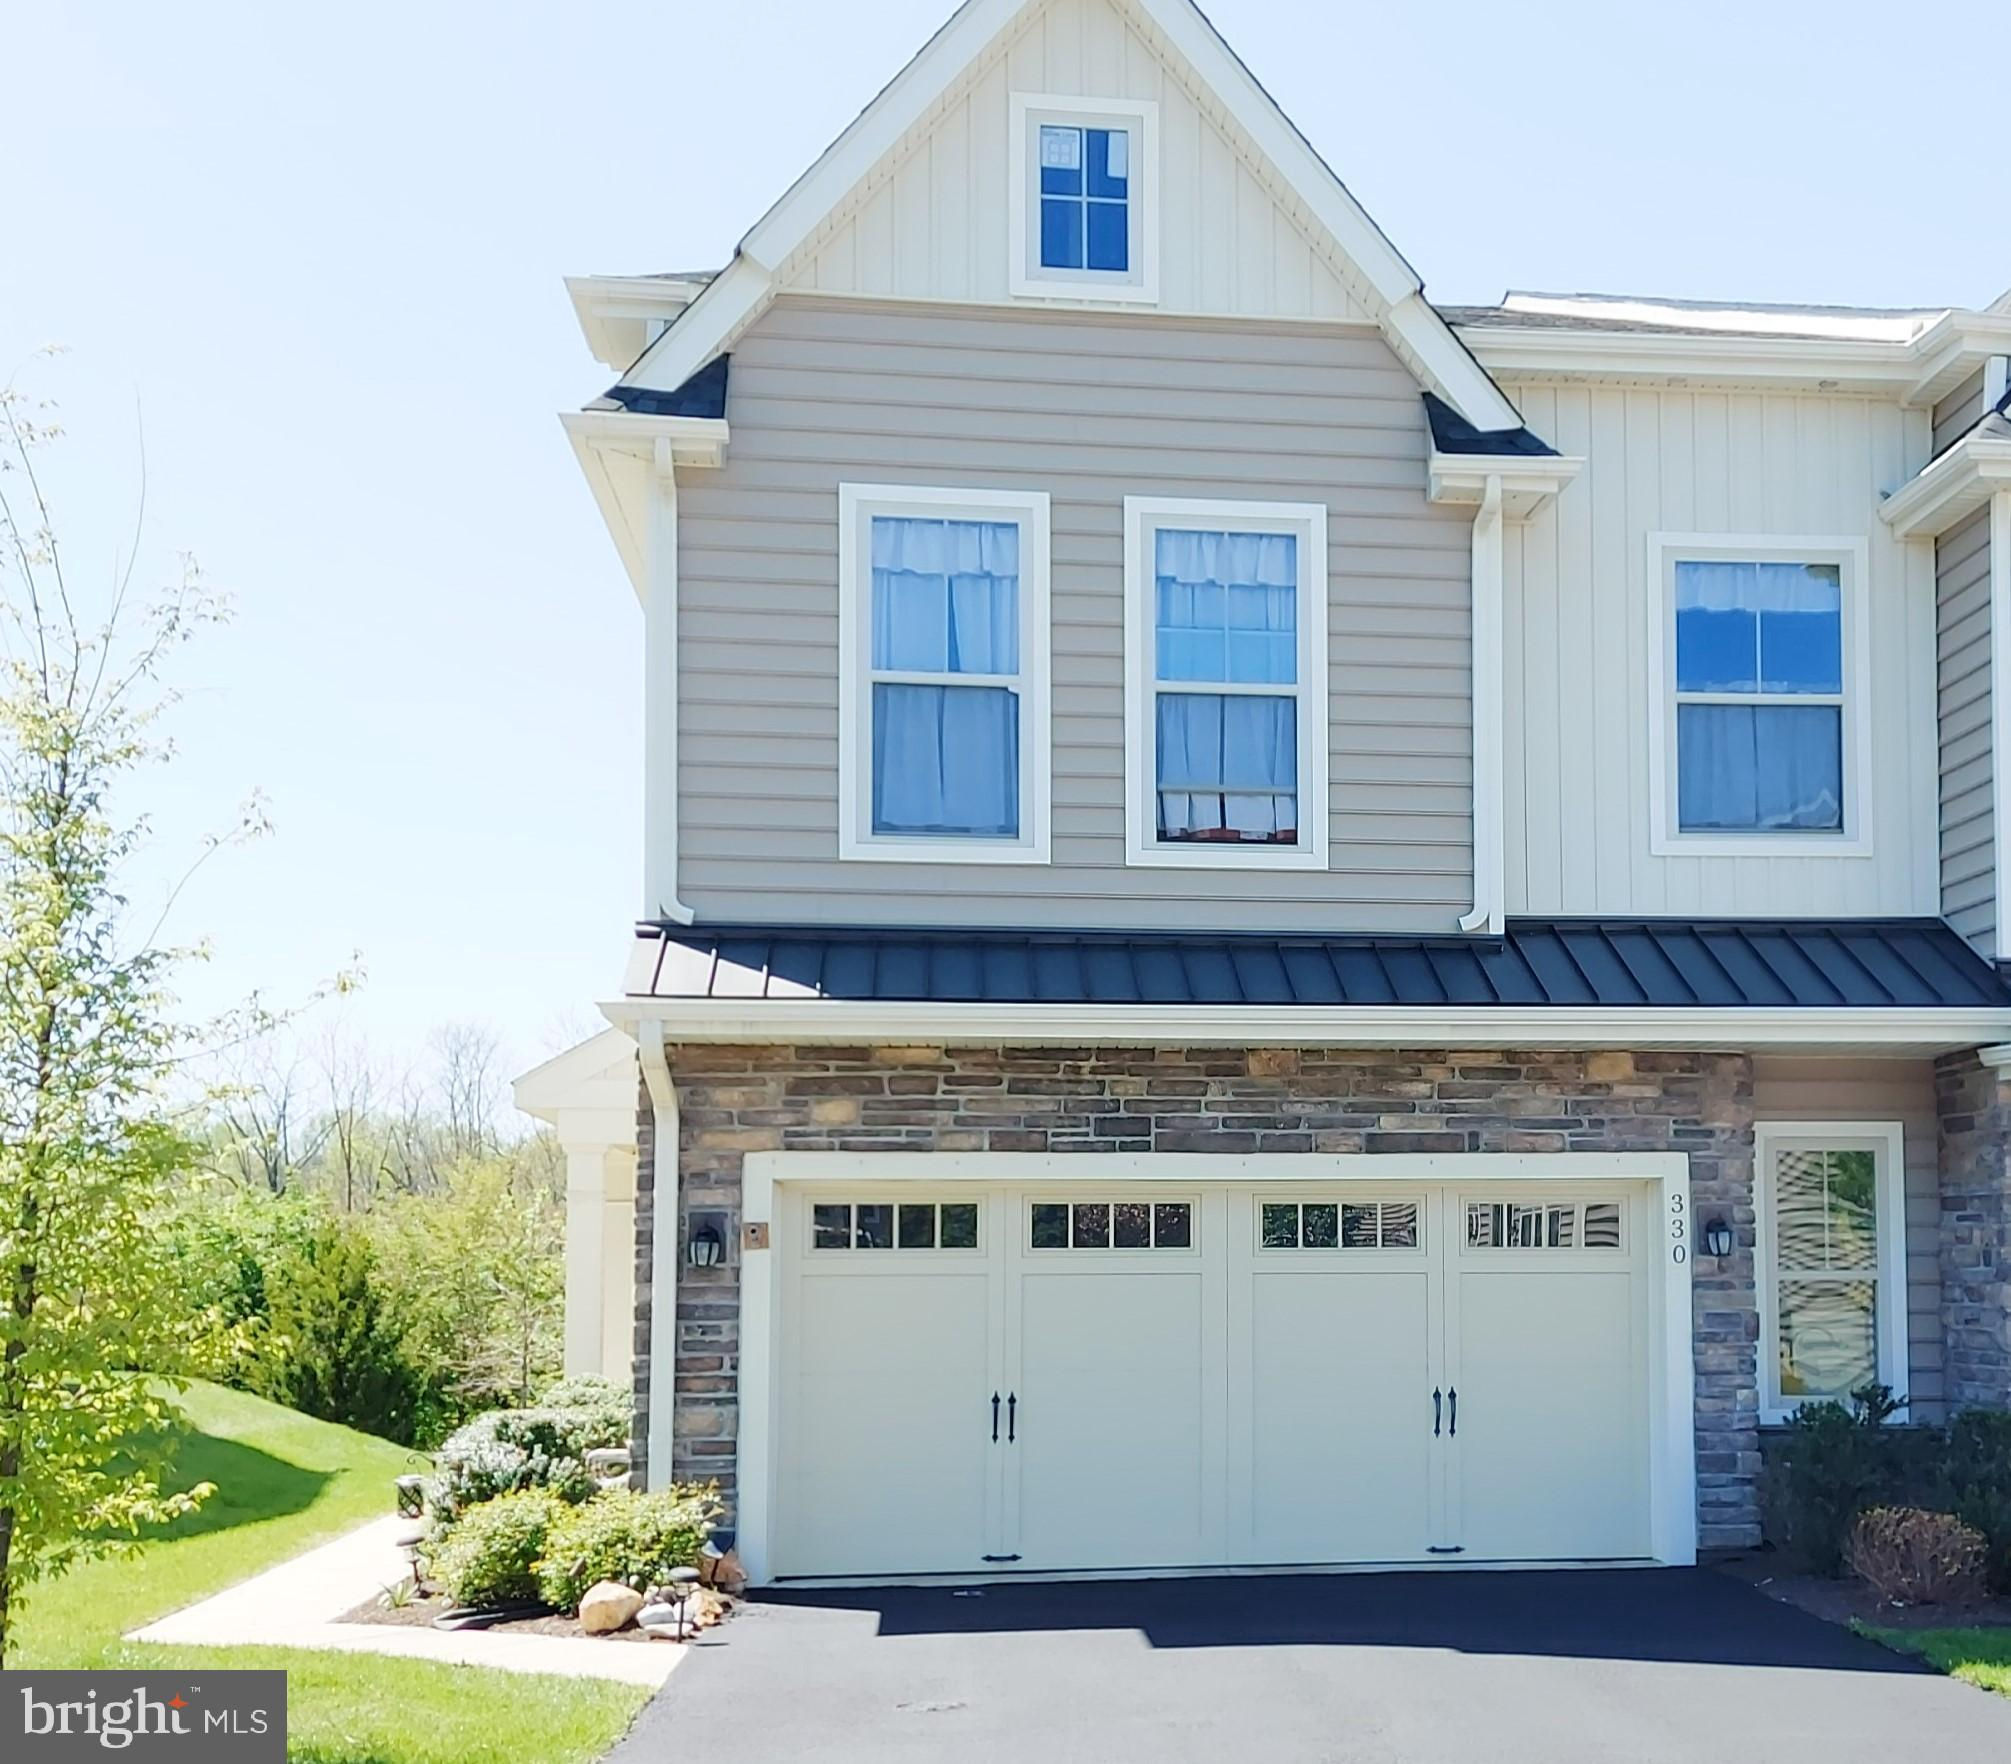 330 Redbud Lane, Kennett Square, PA 19348 is now new to the market!